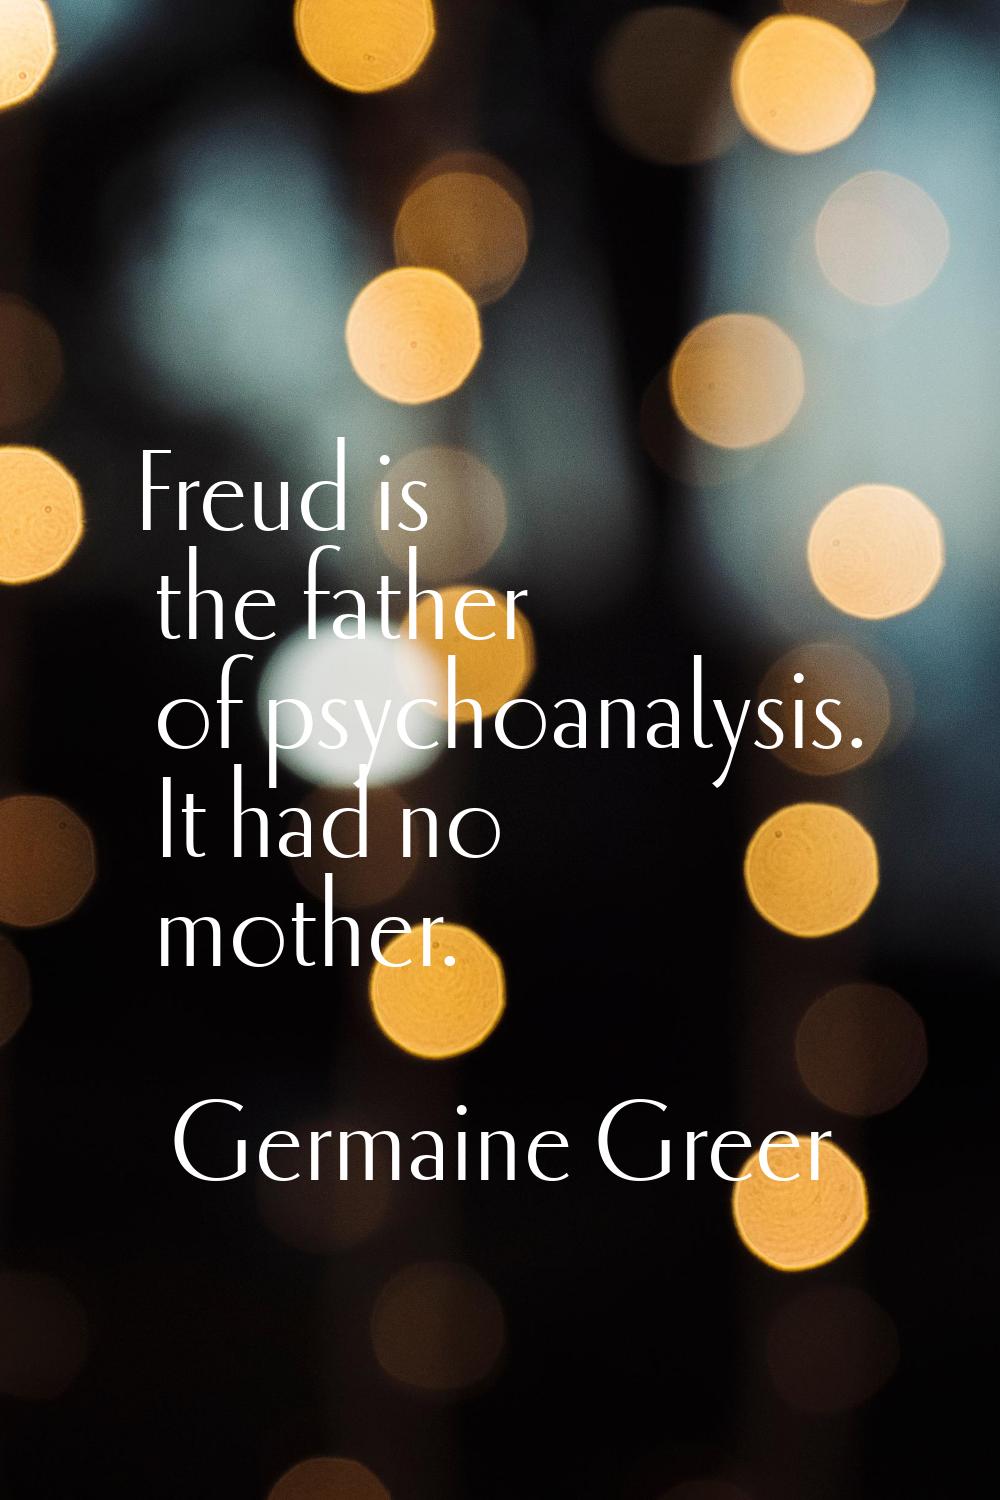 Freud is the father of psychoanalysis. It had no mother.